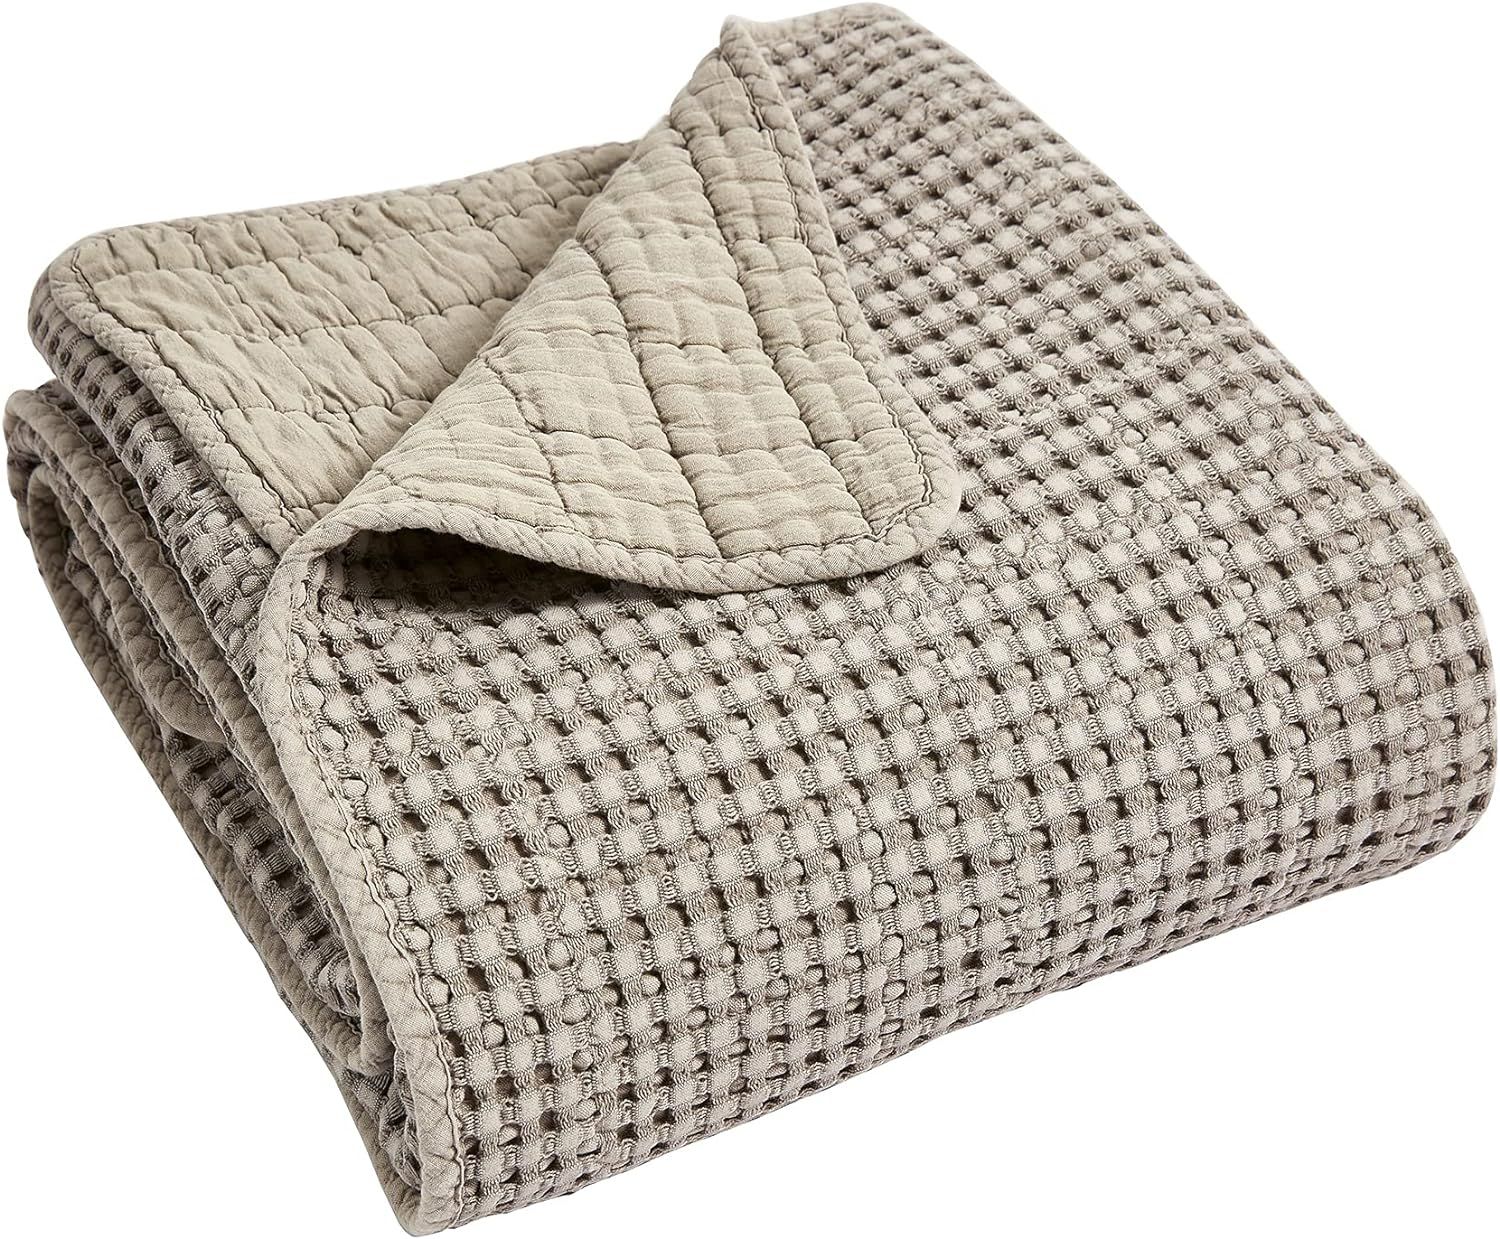 Levtex Home - Mills Waffle - Throw - Taupe Cotton Waffle - Throw Size 50 x 60in. | Amazon (US)